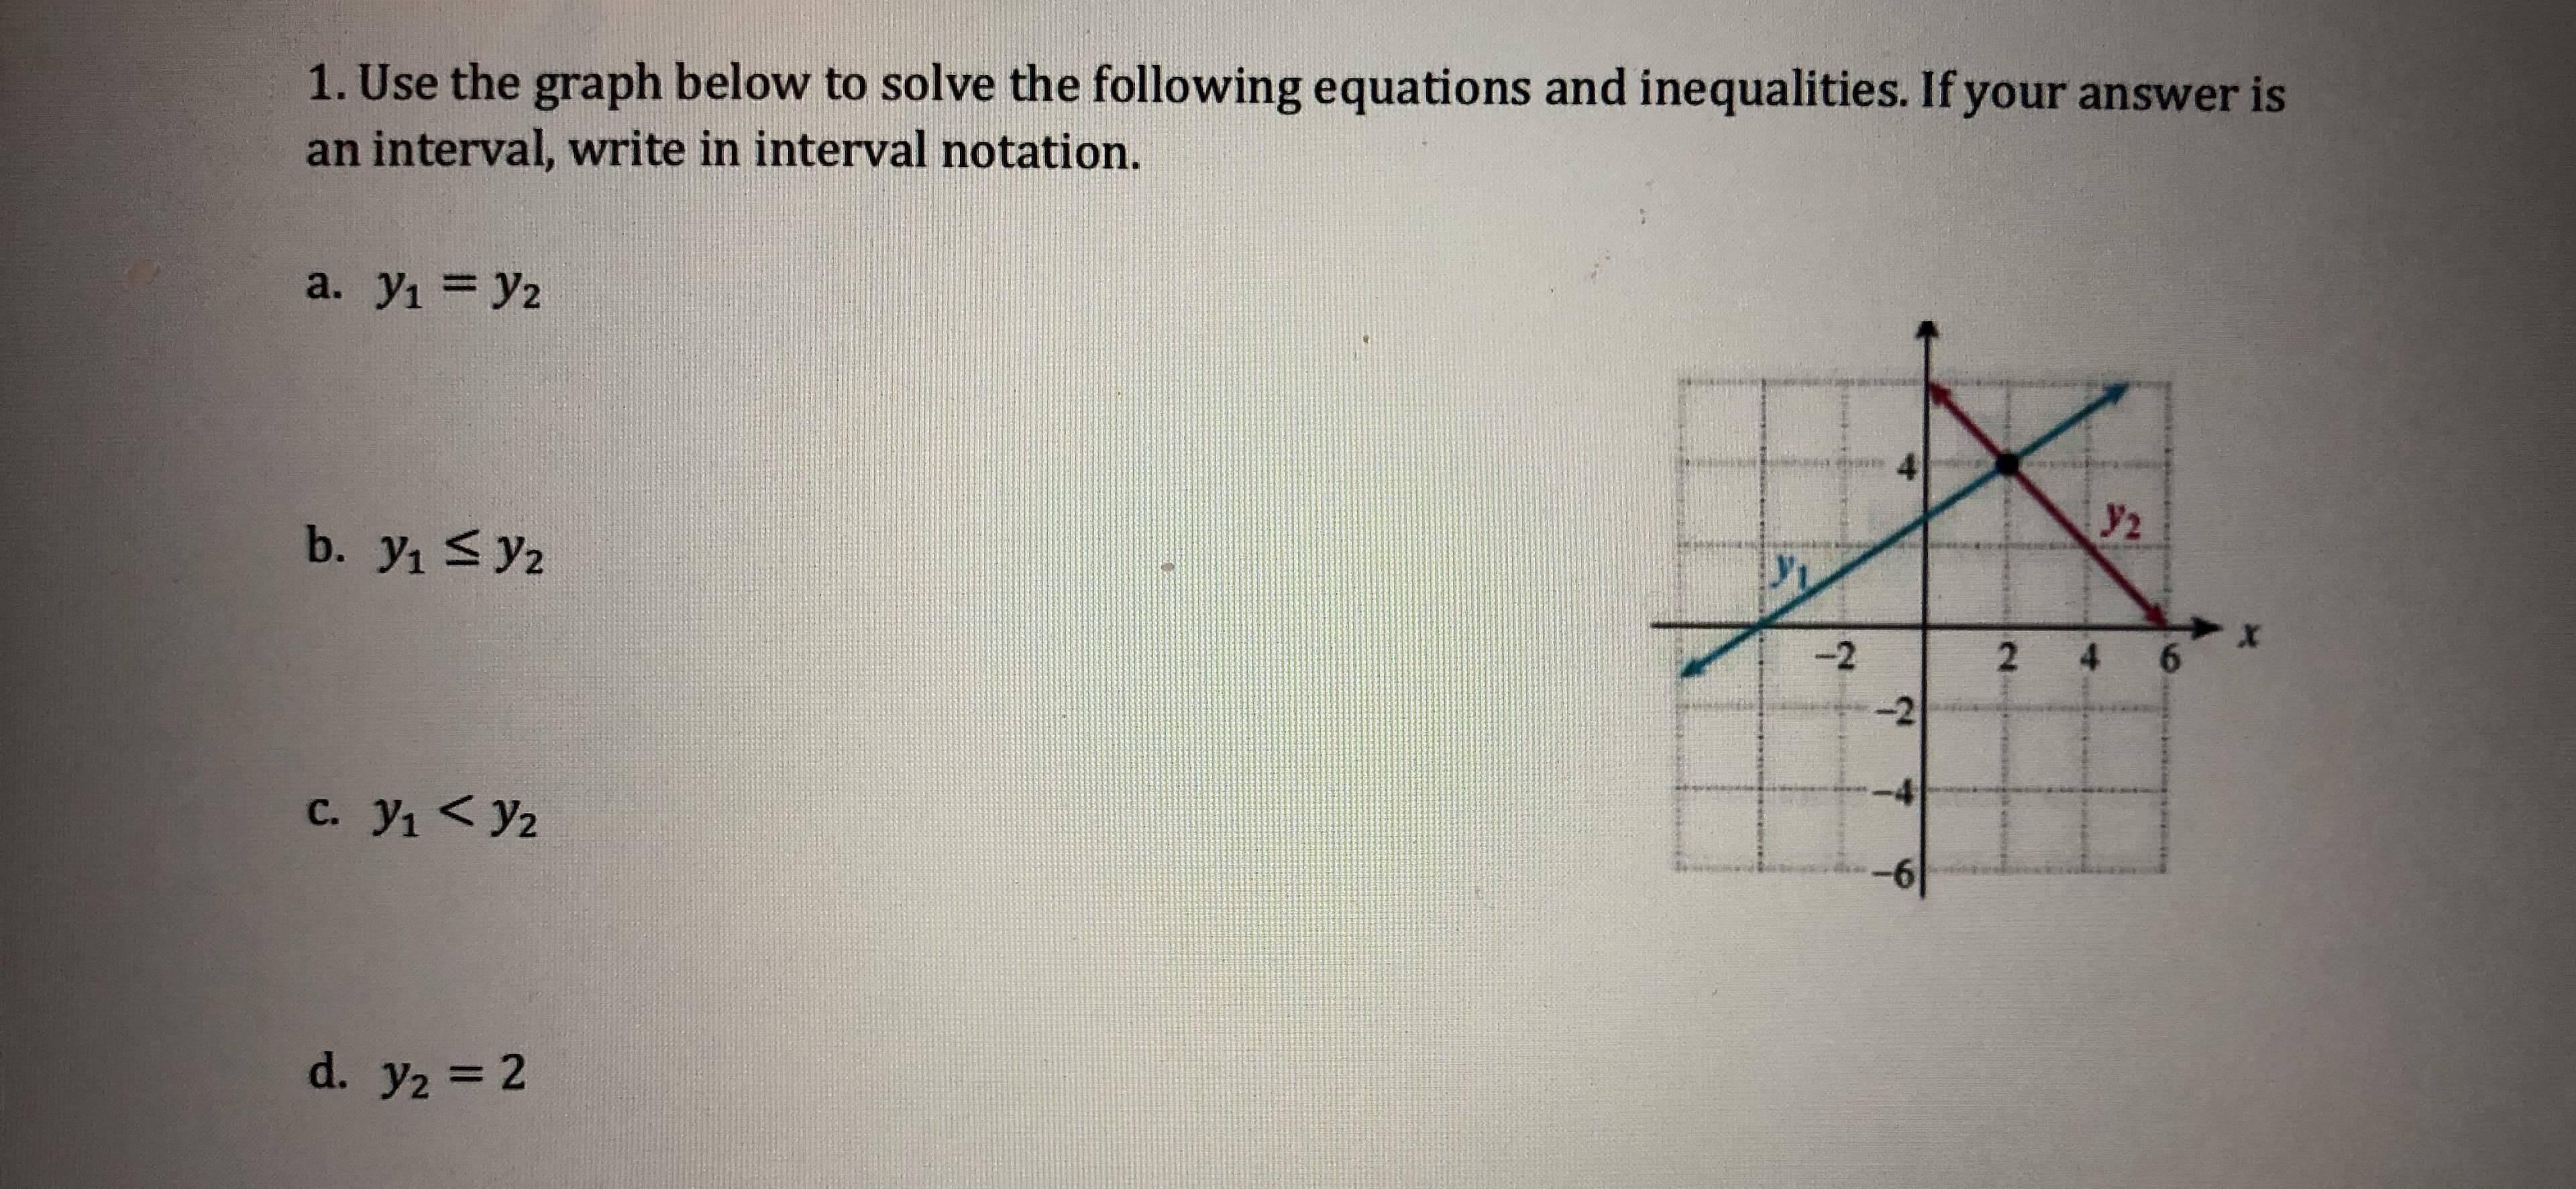 1. Use the graph below to solve the following equations and inequalities. If your answer is
an interval, write in interval notation.
y2
2
-2
-4
-6
C. yi y2
